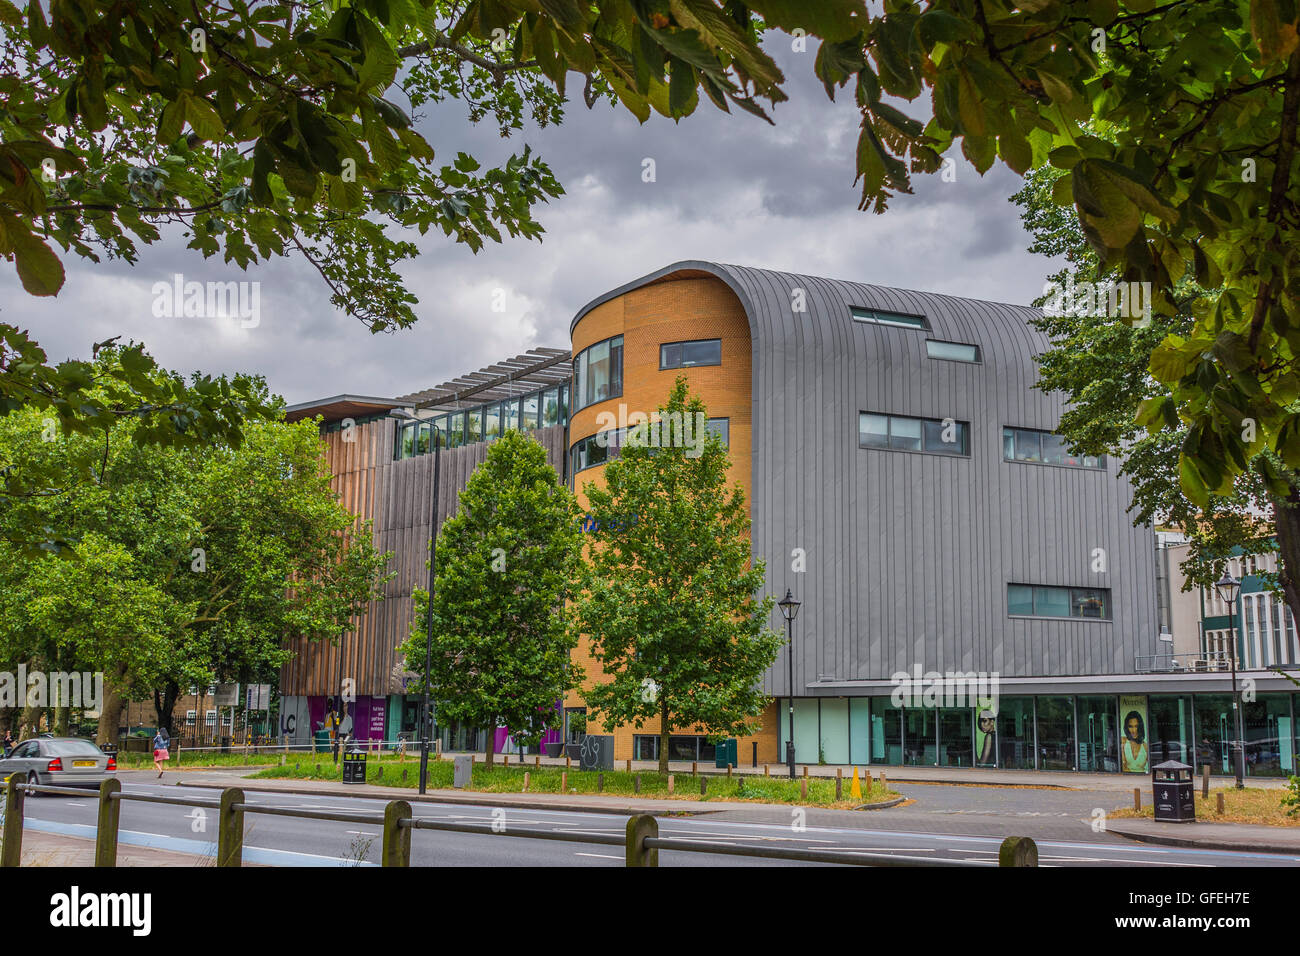 Lambeth College is a Further Education college in the London Borough of Lambeth. Stock Photo